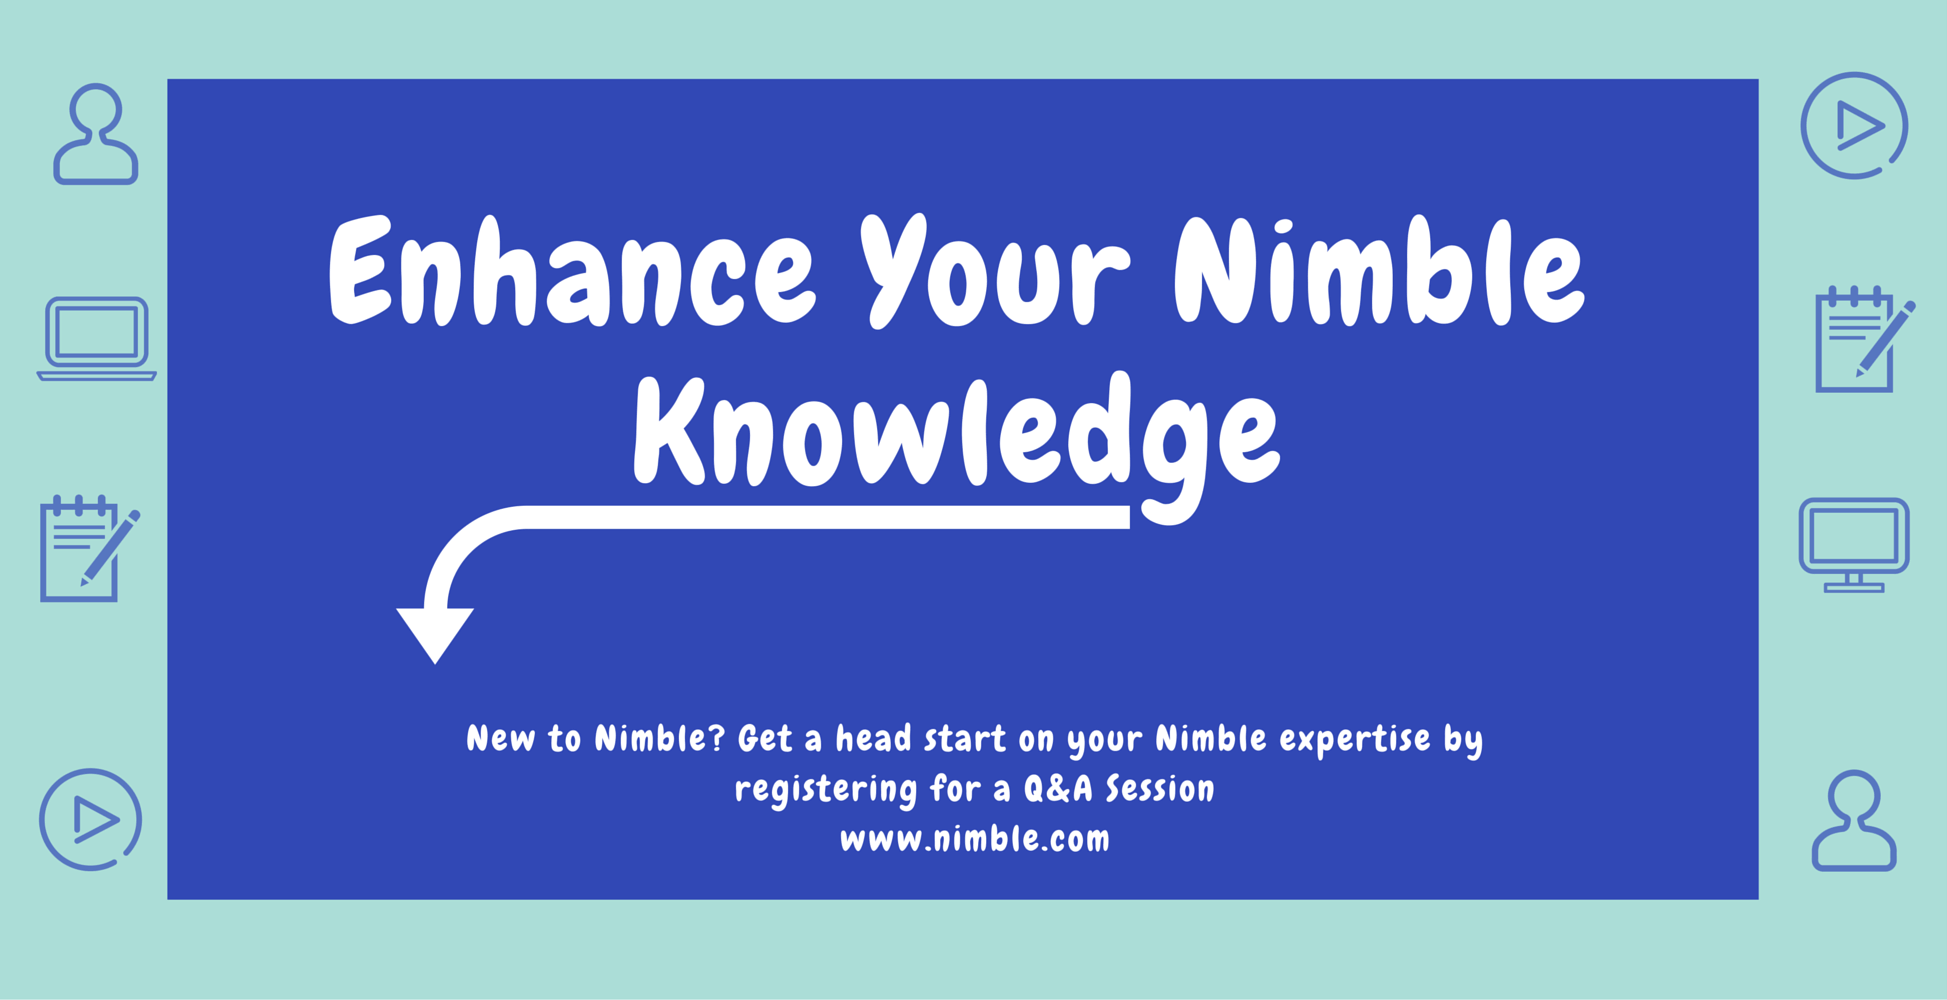 Strengthen Your Nimble Knowledge